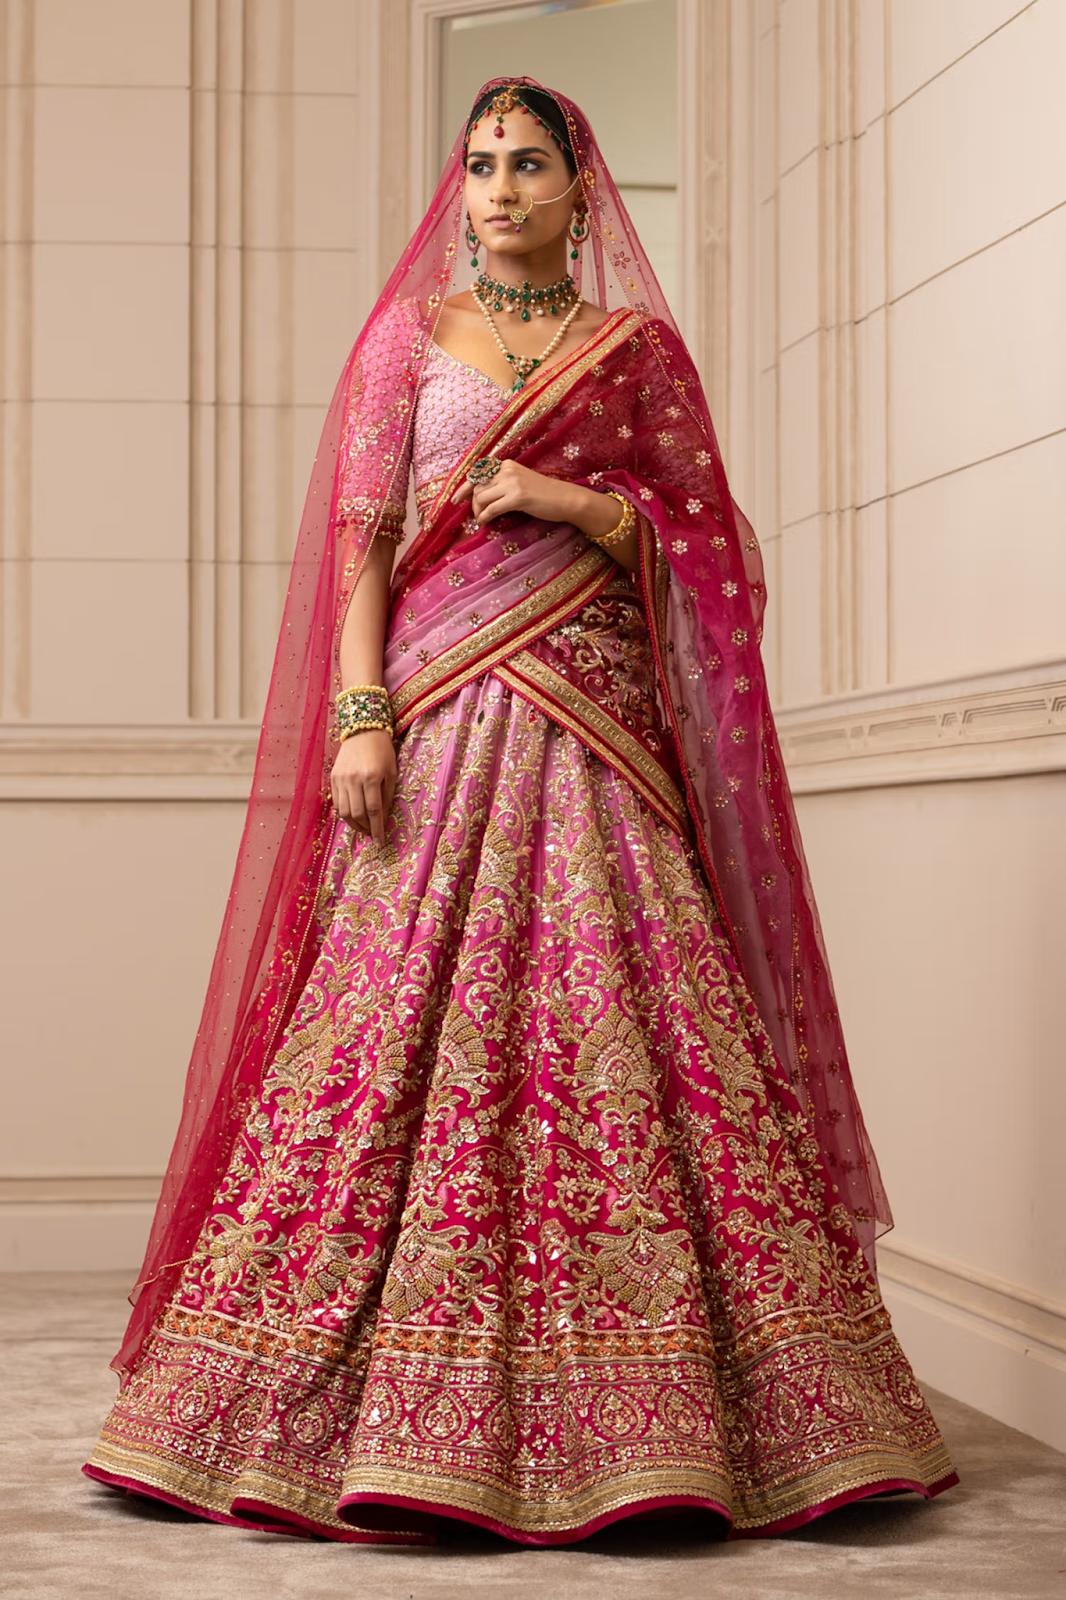 Neon Pink Neon Pink Bridal Lehenga by HER CLOSET for rent online | FLYROBE